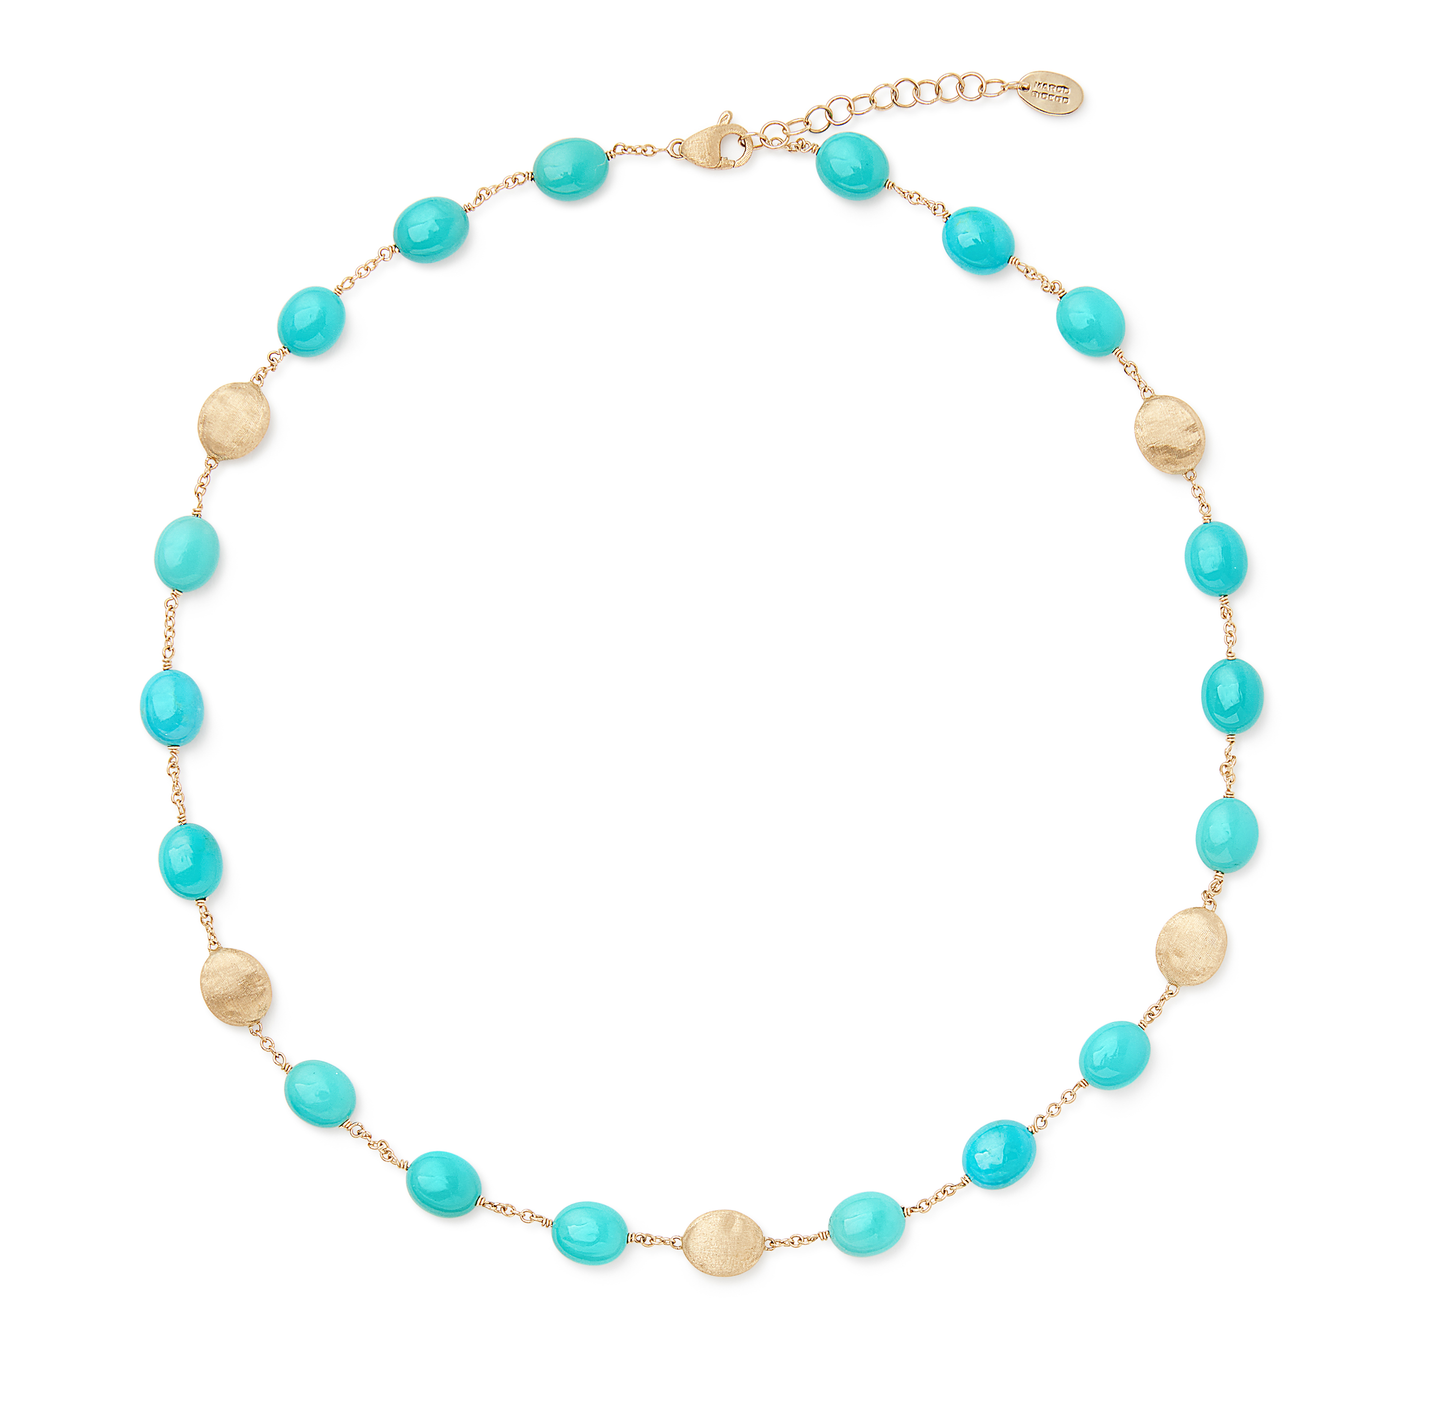 Marco Bicego Siviglia Yellow Gold Bead and Turquoise Necklace